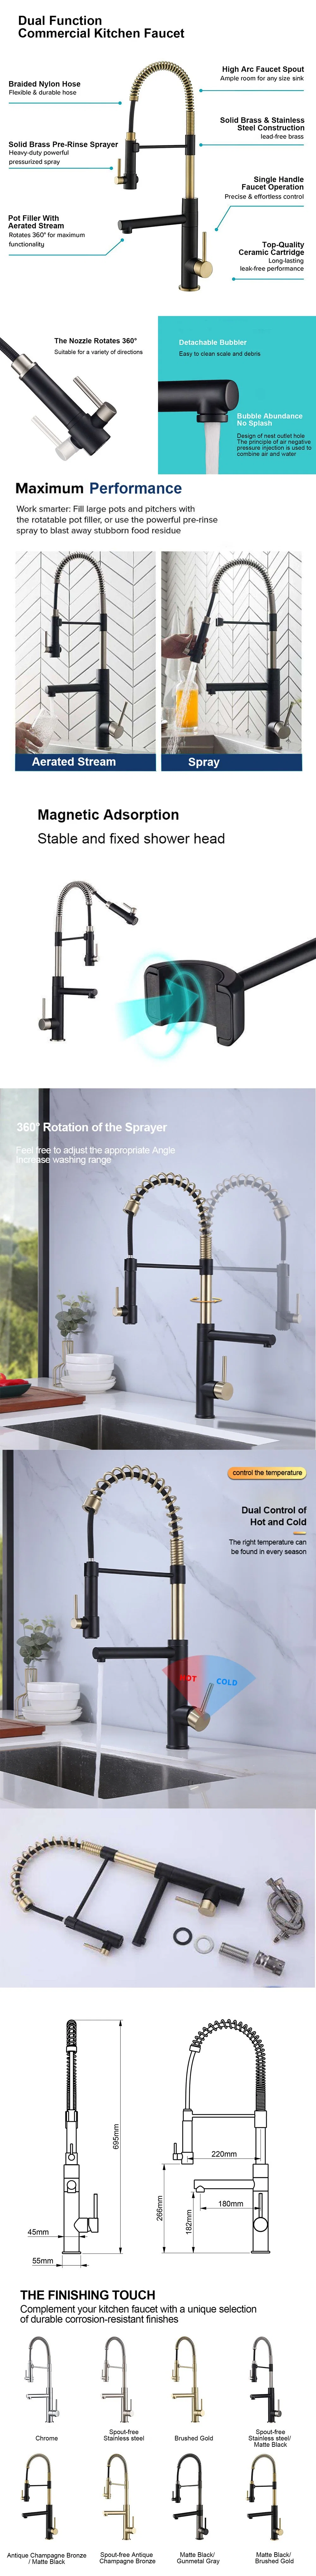 Purified Water Kitchen Faucet Pull Down Spray Head 360 Rotate Mixer Tap Deck Mount Drinking Water Torneira Crane